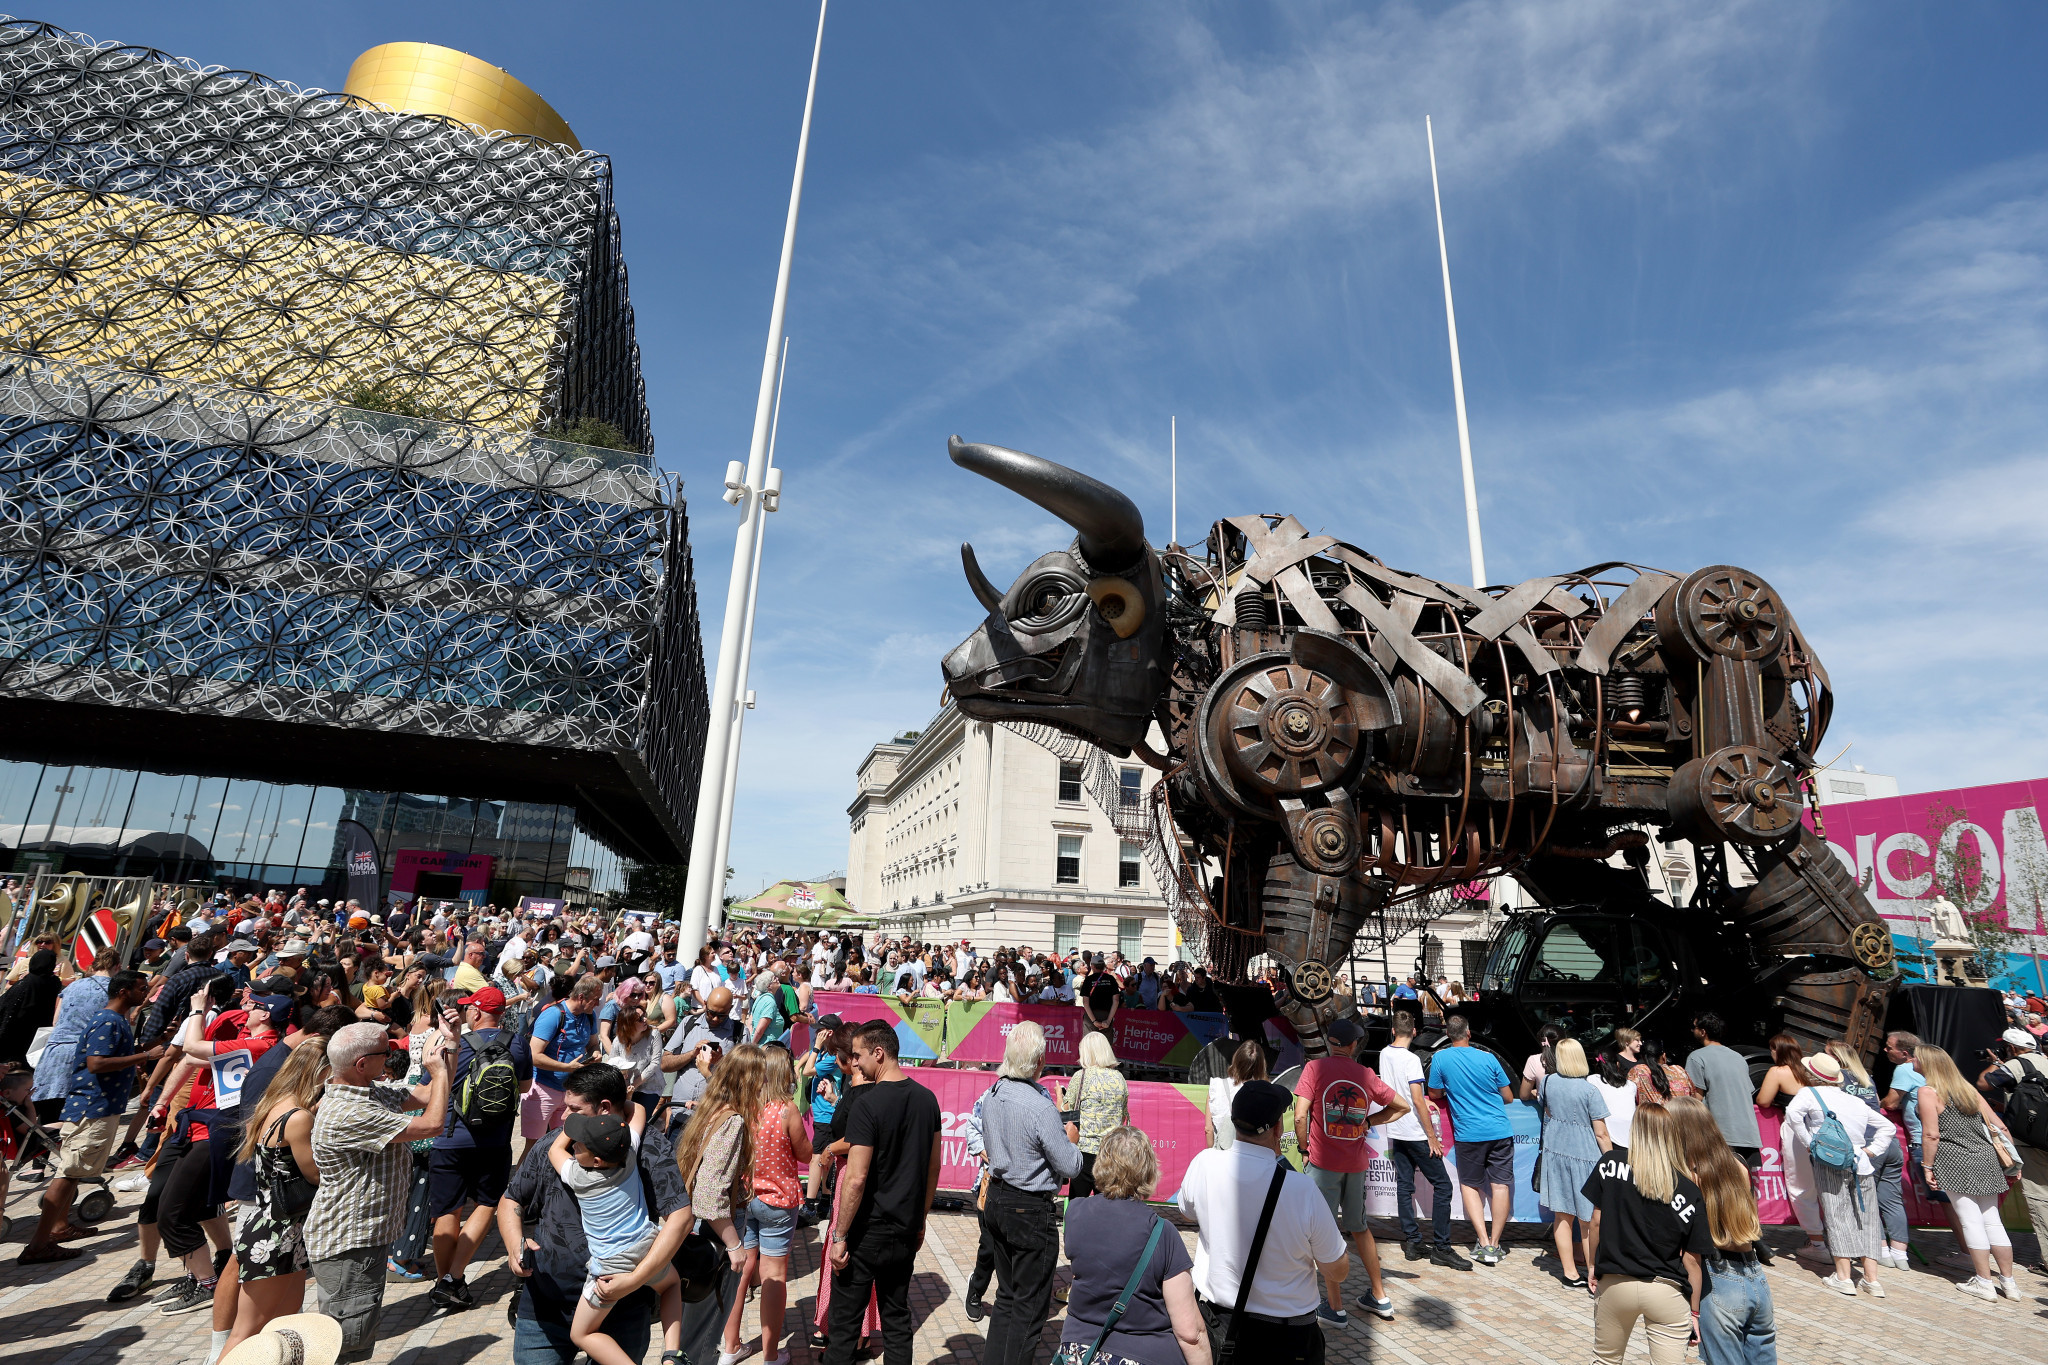 During the Commonwealth Games, the sculpture proved an unexpected hit with crowds at Centenary Square in the centre of Birmingham ©Getty Images